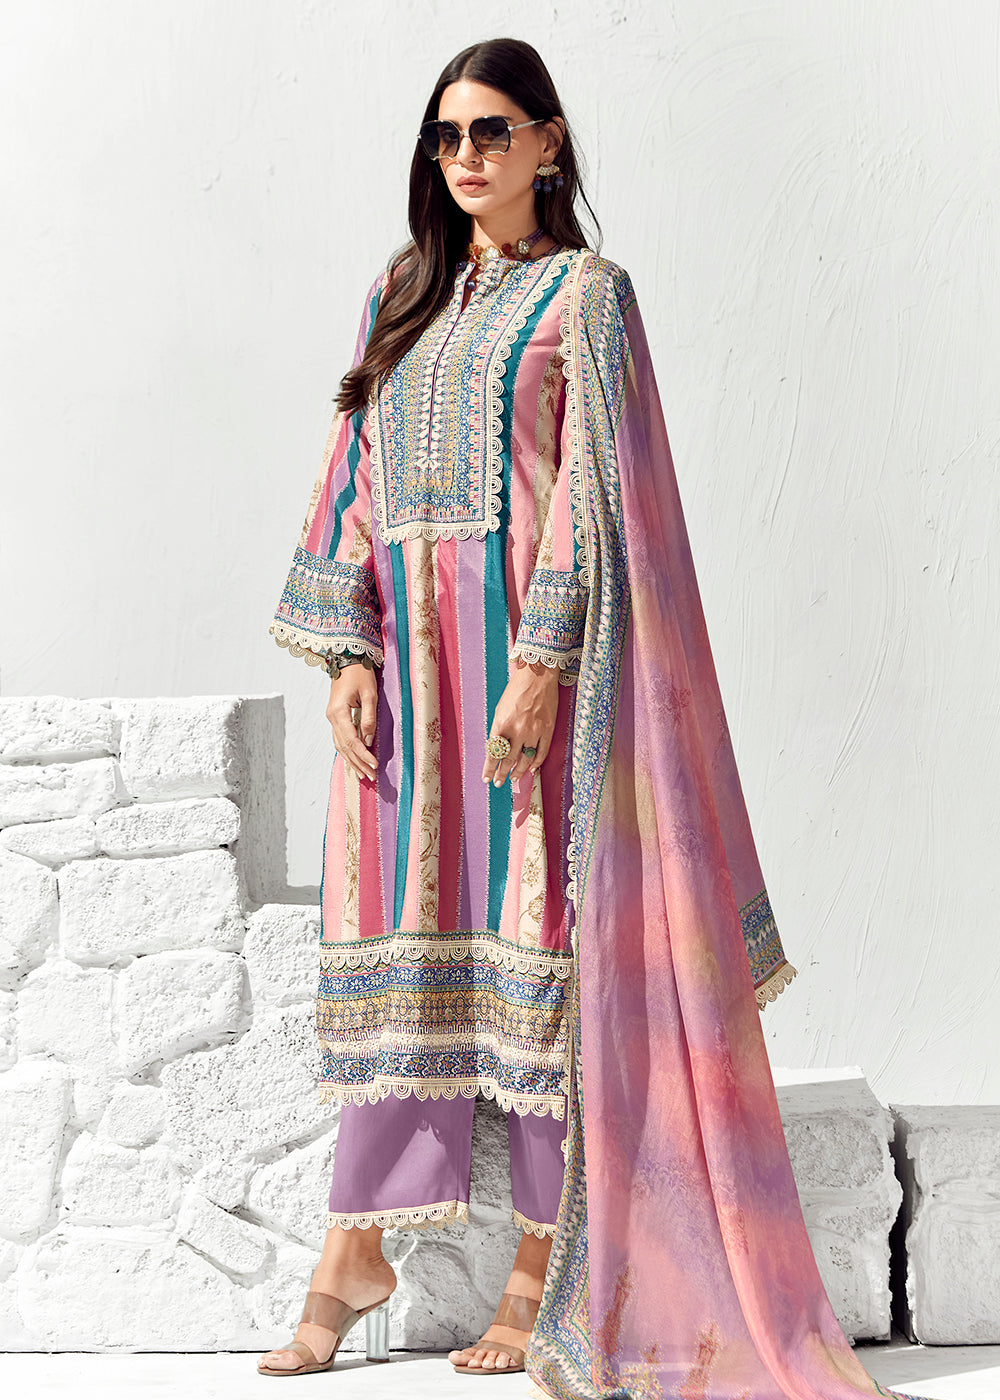 Buy Now Purple Multicolor Cotton Lawn Digital Printed Salwar Suit Online in USA, UK, Canada, Germany, Australia & Worldwide at Empress Clothing.